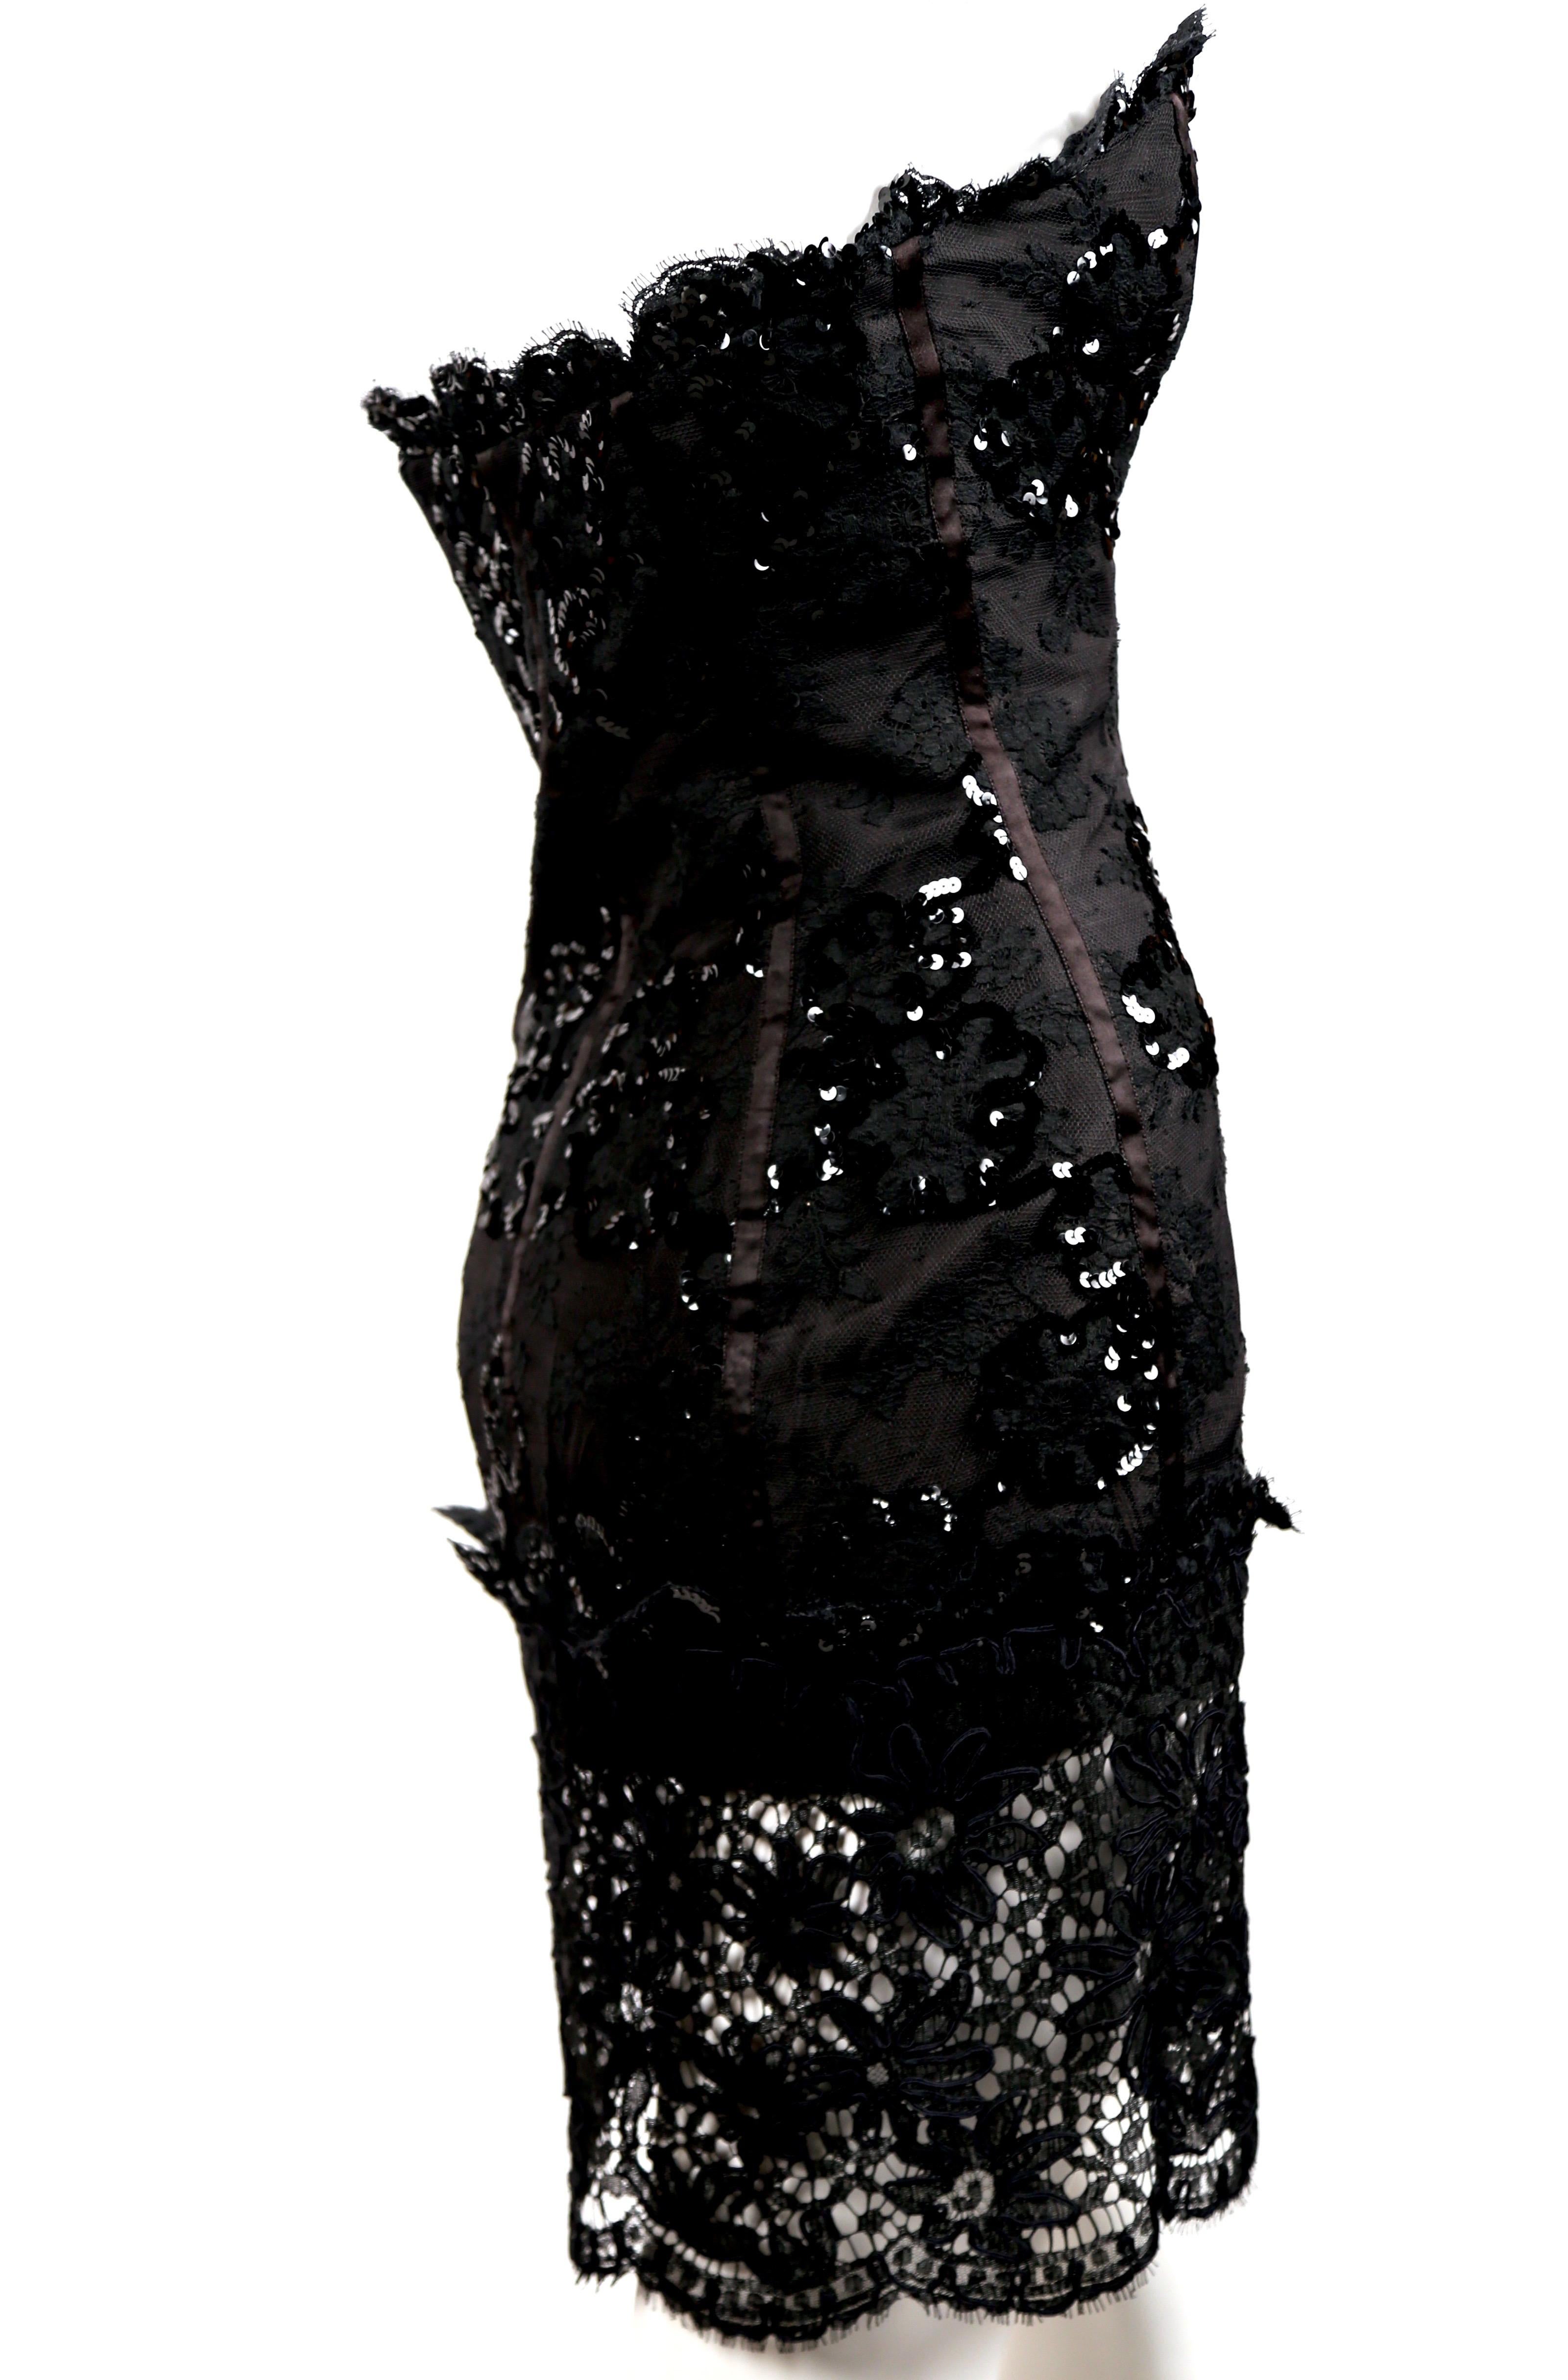 Jet-black, lace mini dress with sequins, bottom sheer panel and satin trim from Yves Saint Laurent dating to Spring of 1992. Dress is labeled a French size 38; however it would better fit a modern day size 34 or 36. Approximate measurements are: